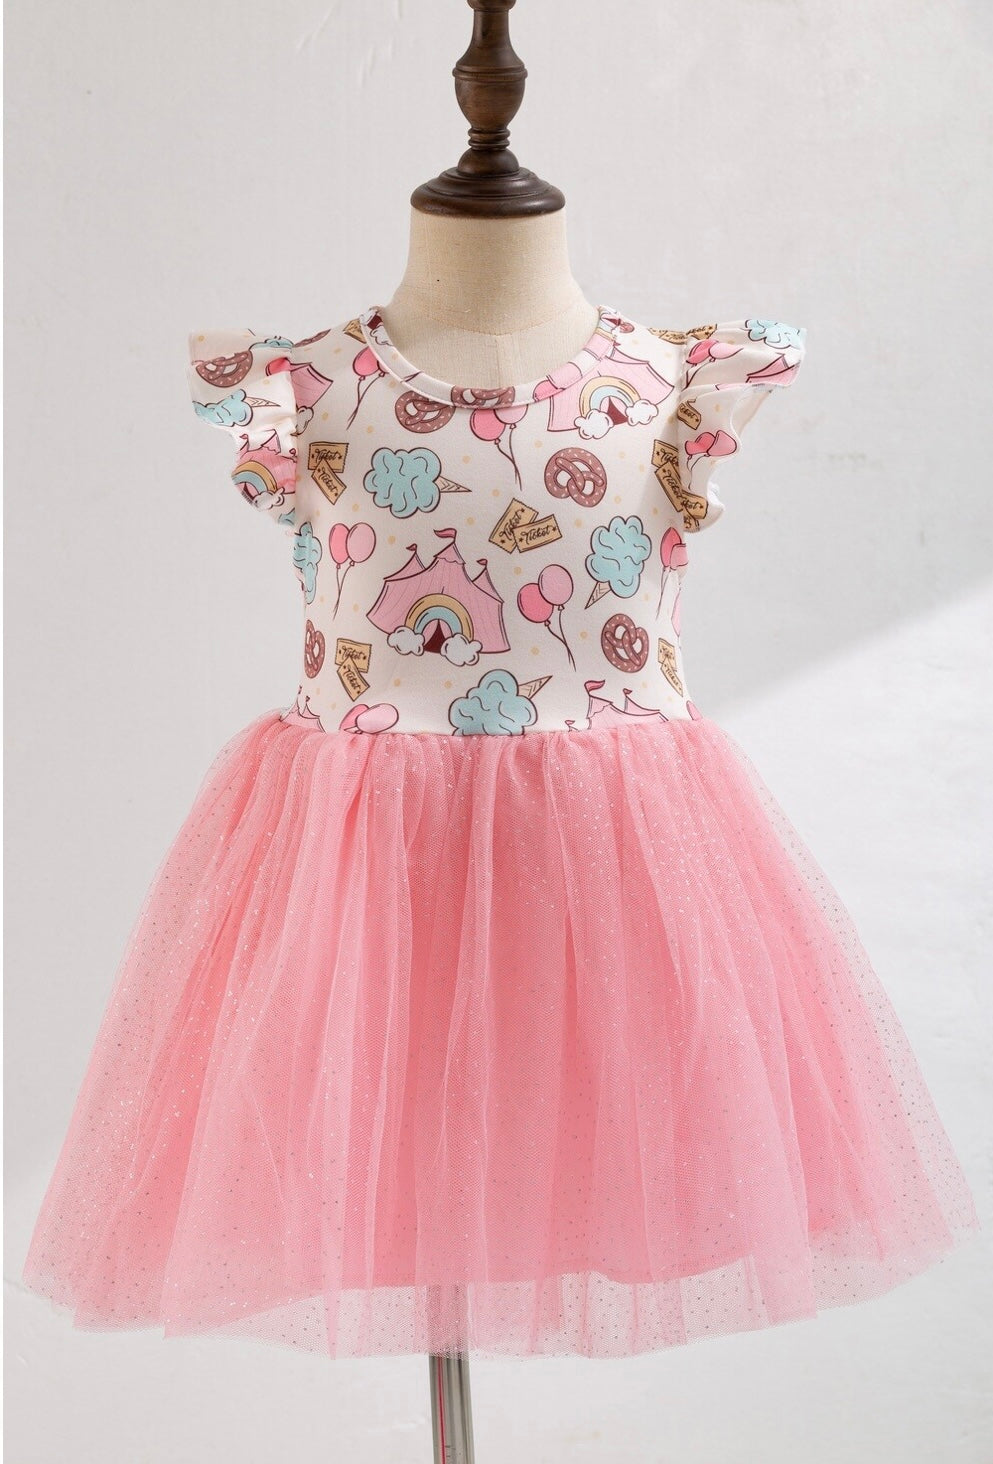 Carnival Tulle Dress by Clover Cottage